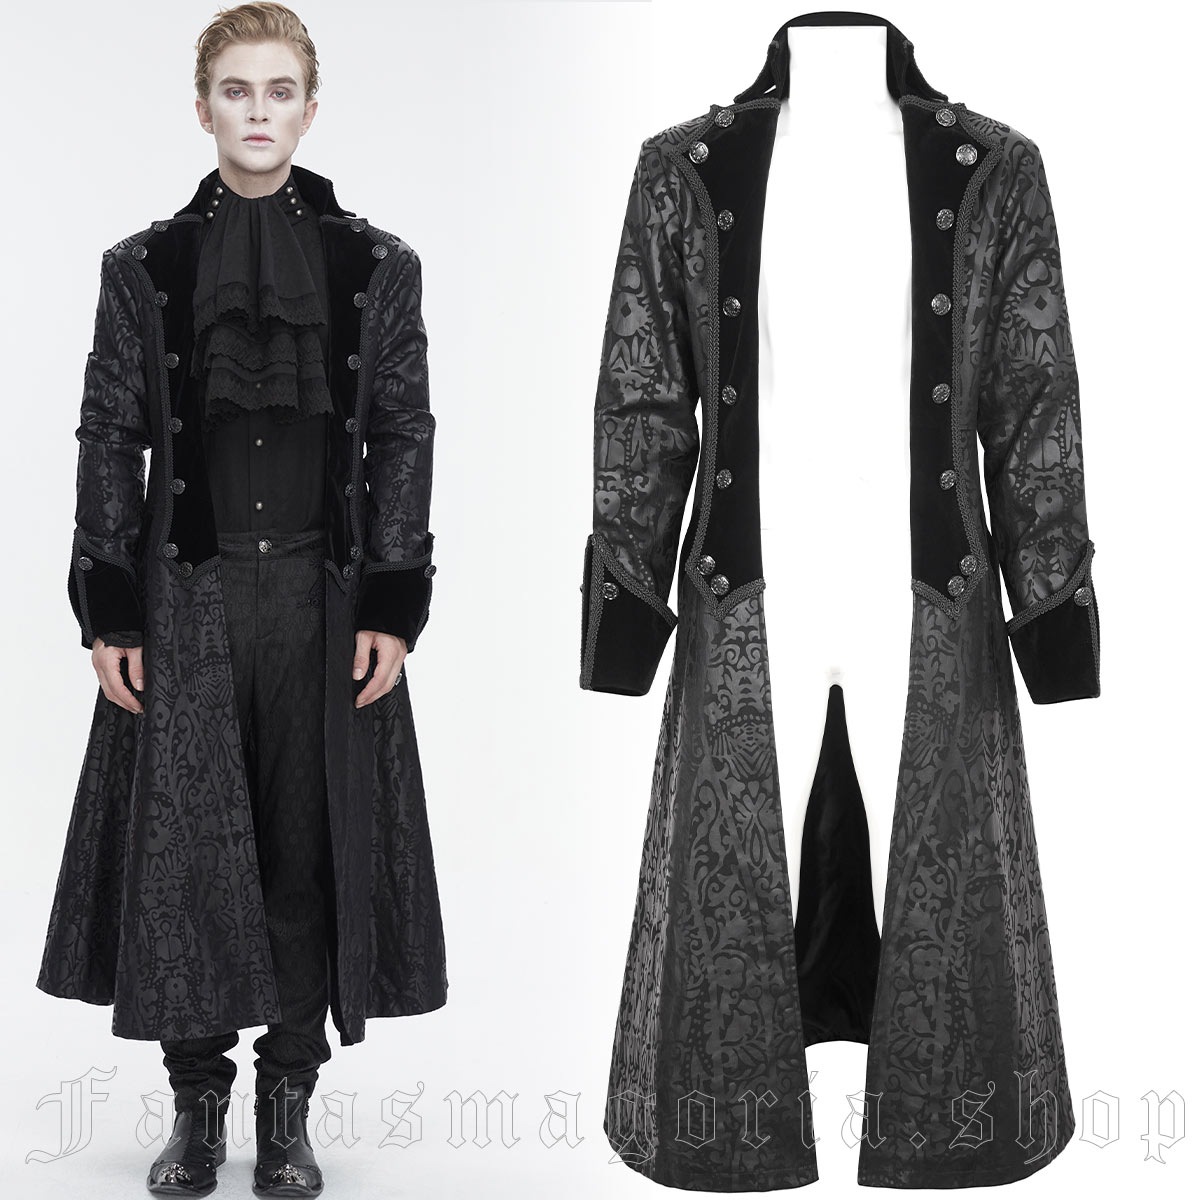 Shop Men's Coats & Jackets | Gothic and Punk Styles